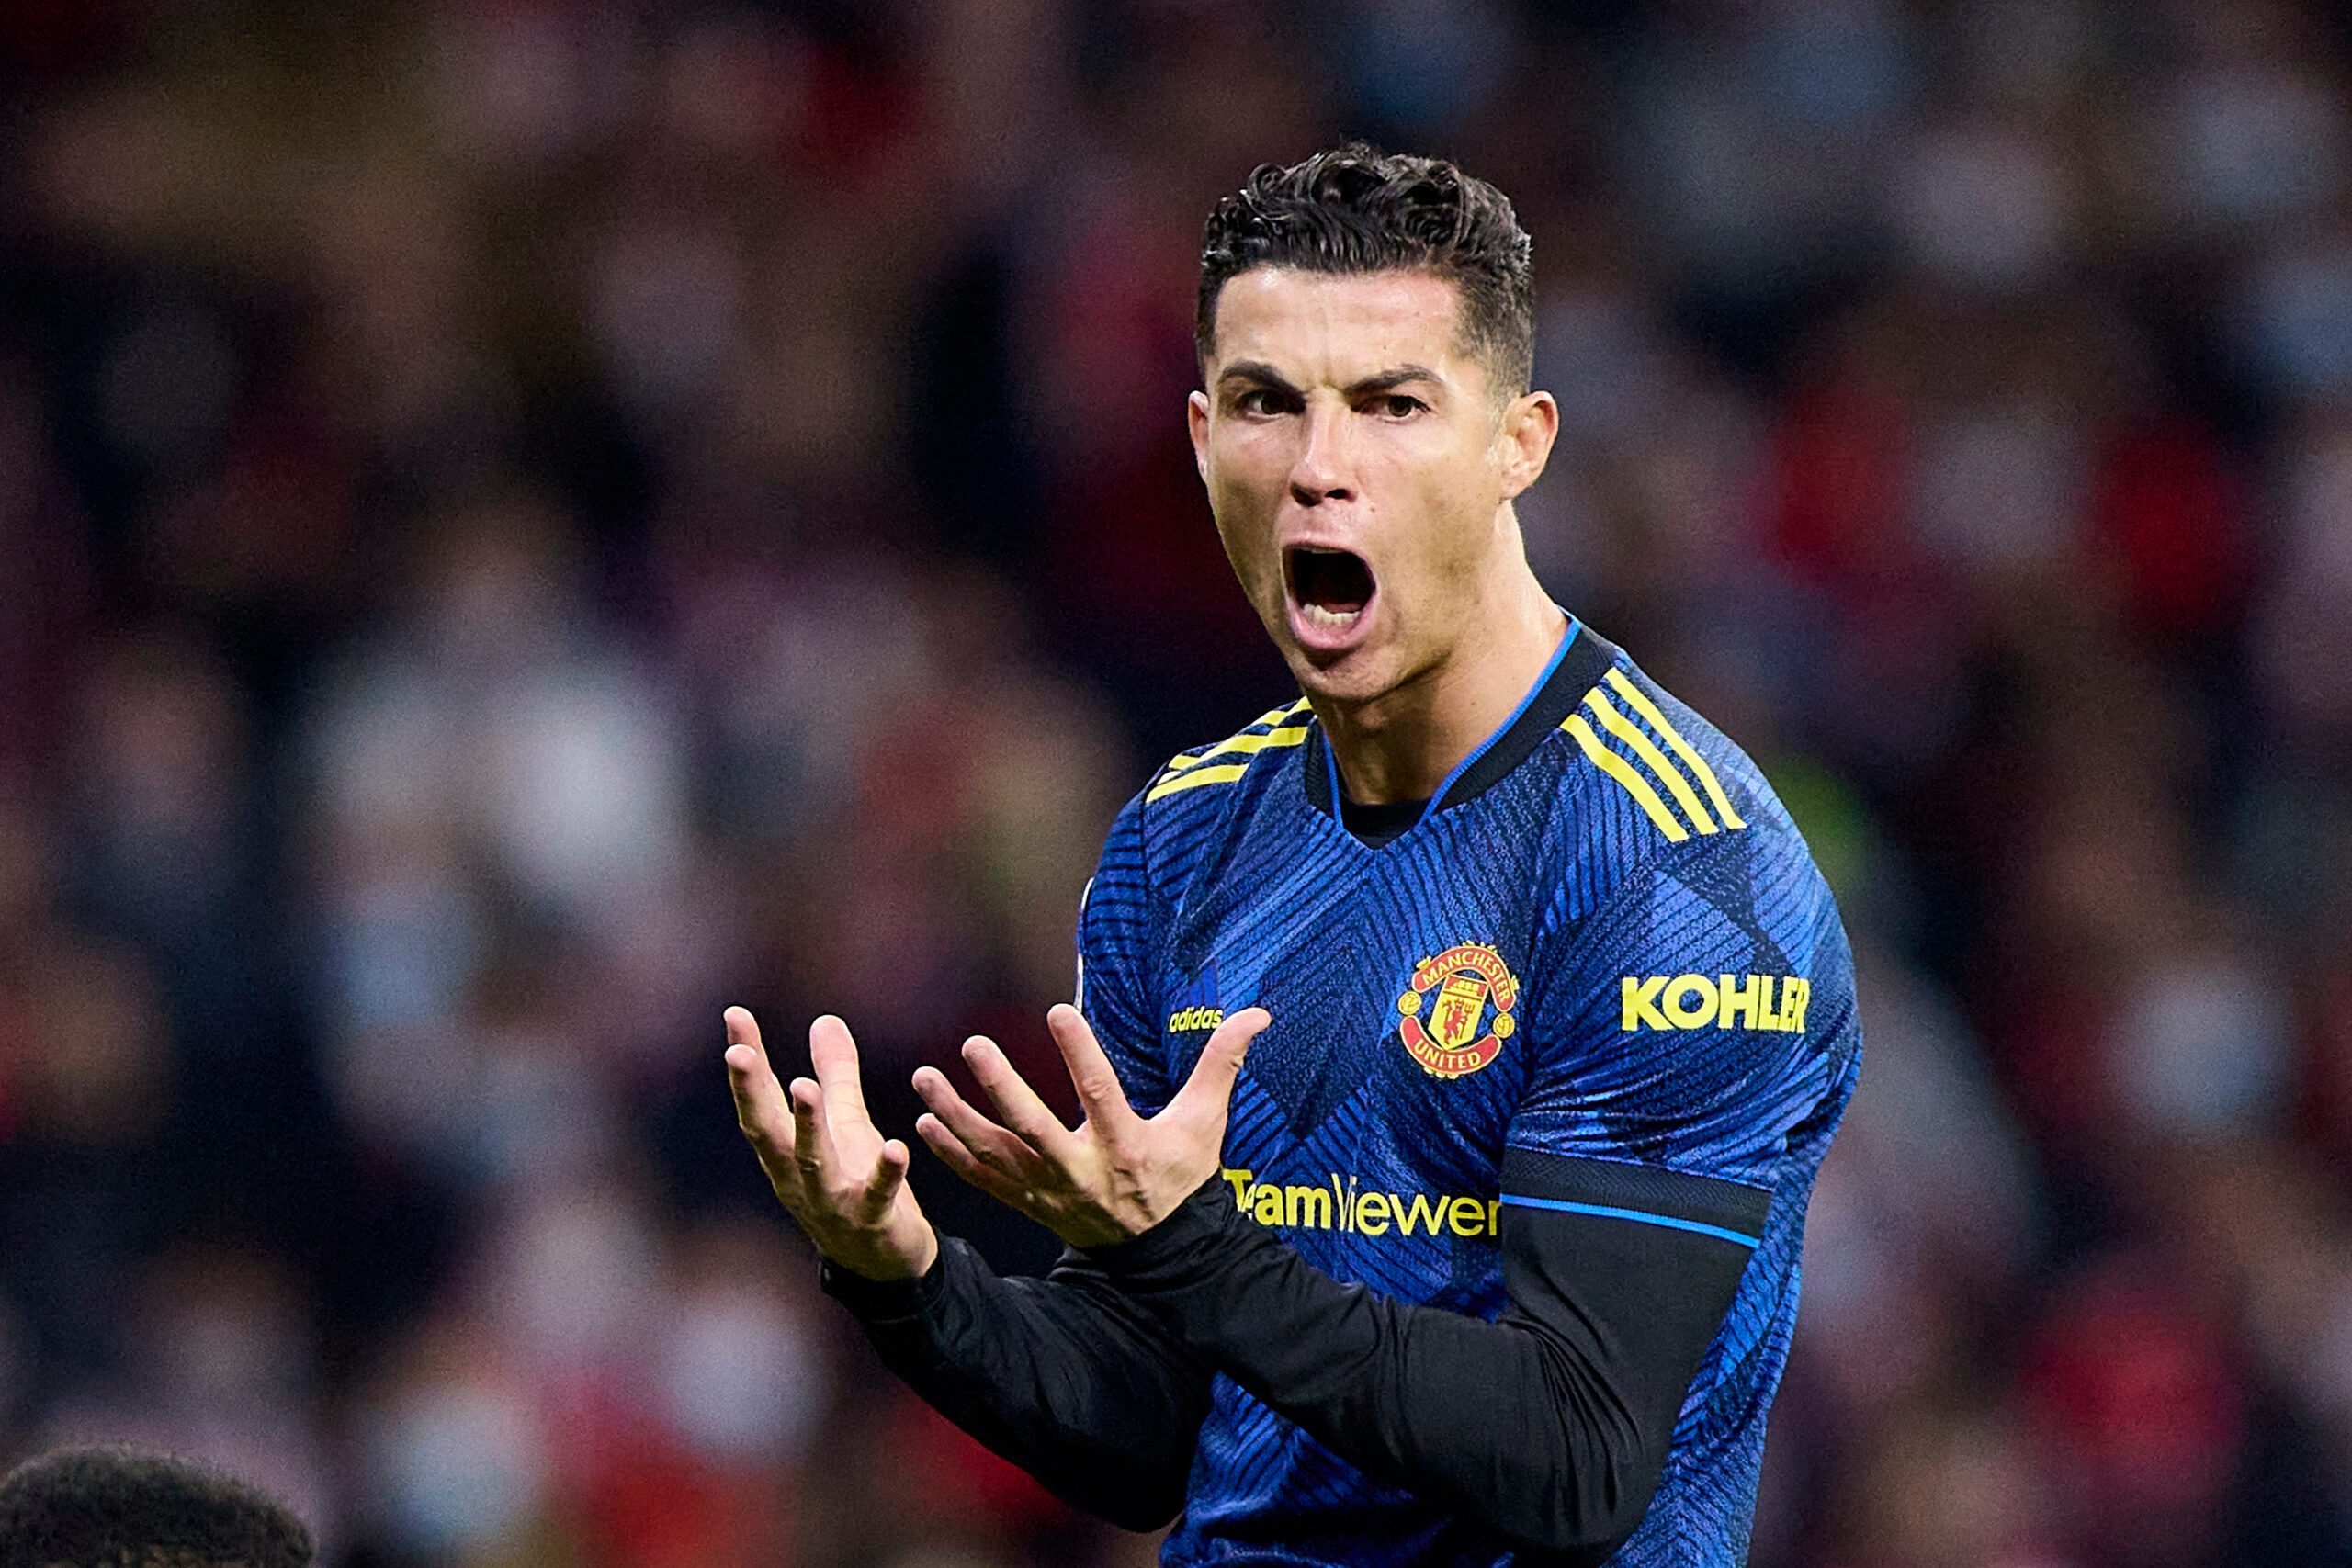 MADRID,SPAIN,23.FEB.22 - SOCCER - UEFA Champions League, last sixteen, Atletico Madrid vs Manchester United. Image shows the disappointment of Cristiano Ronaldo (Manchester).